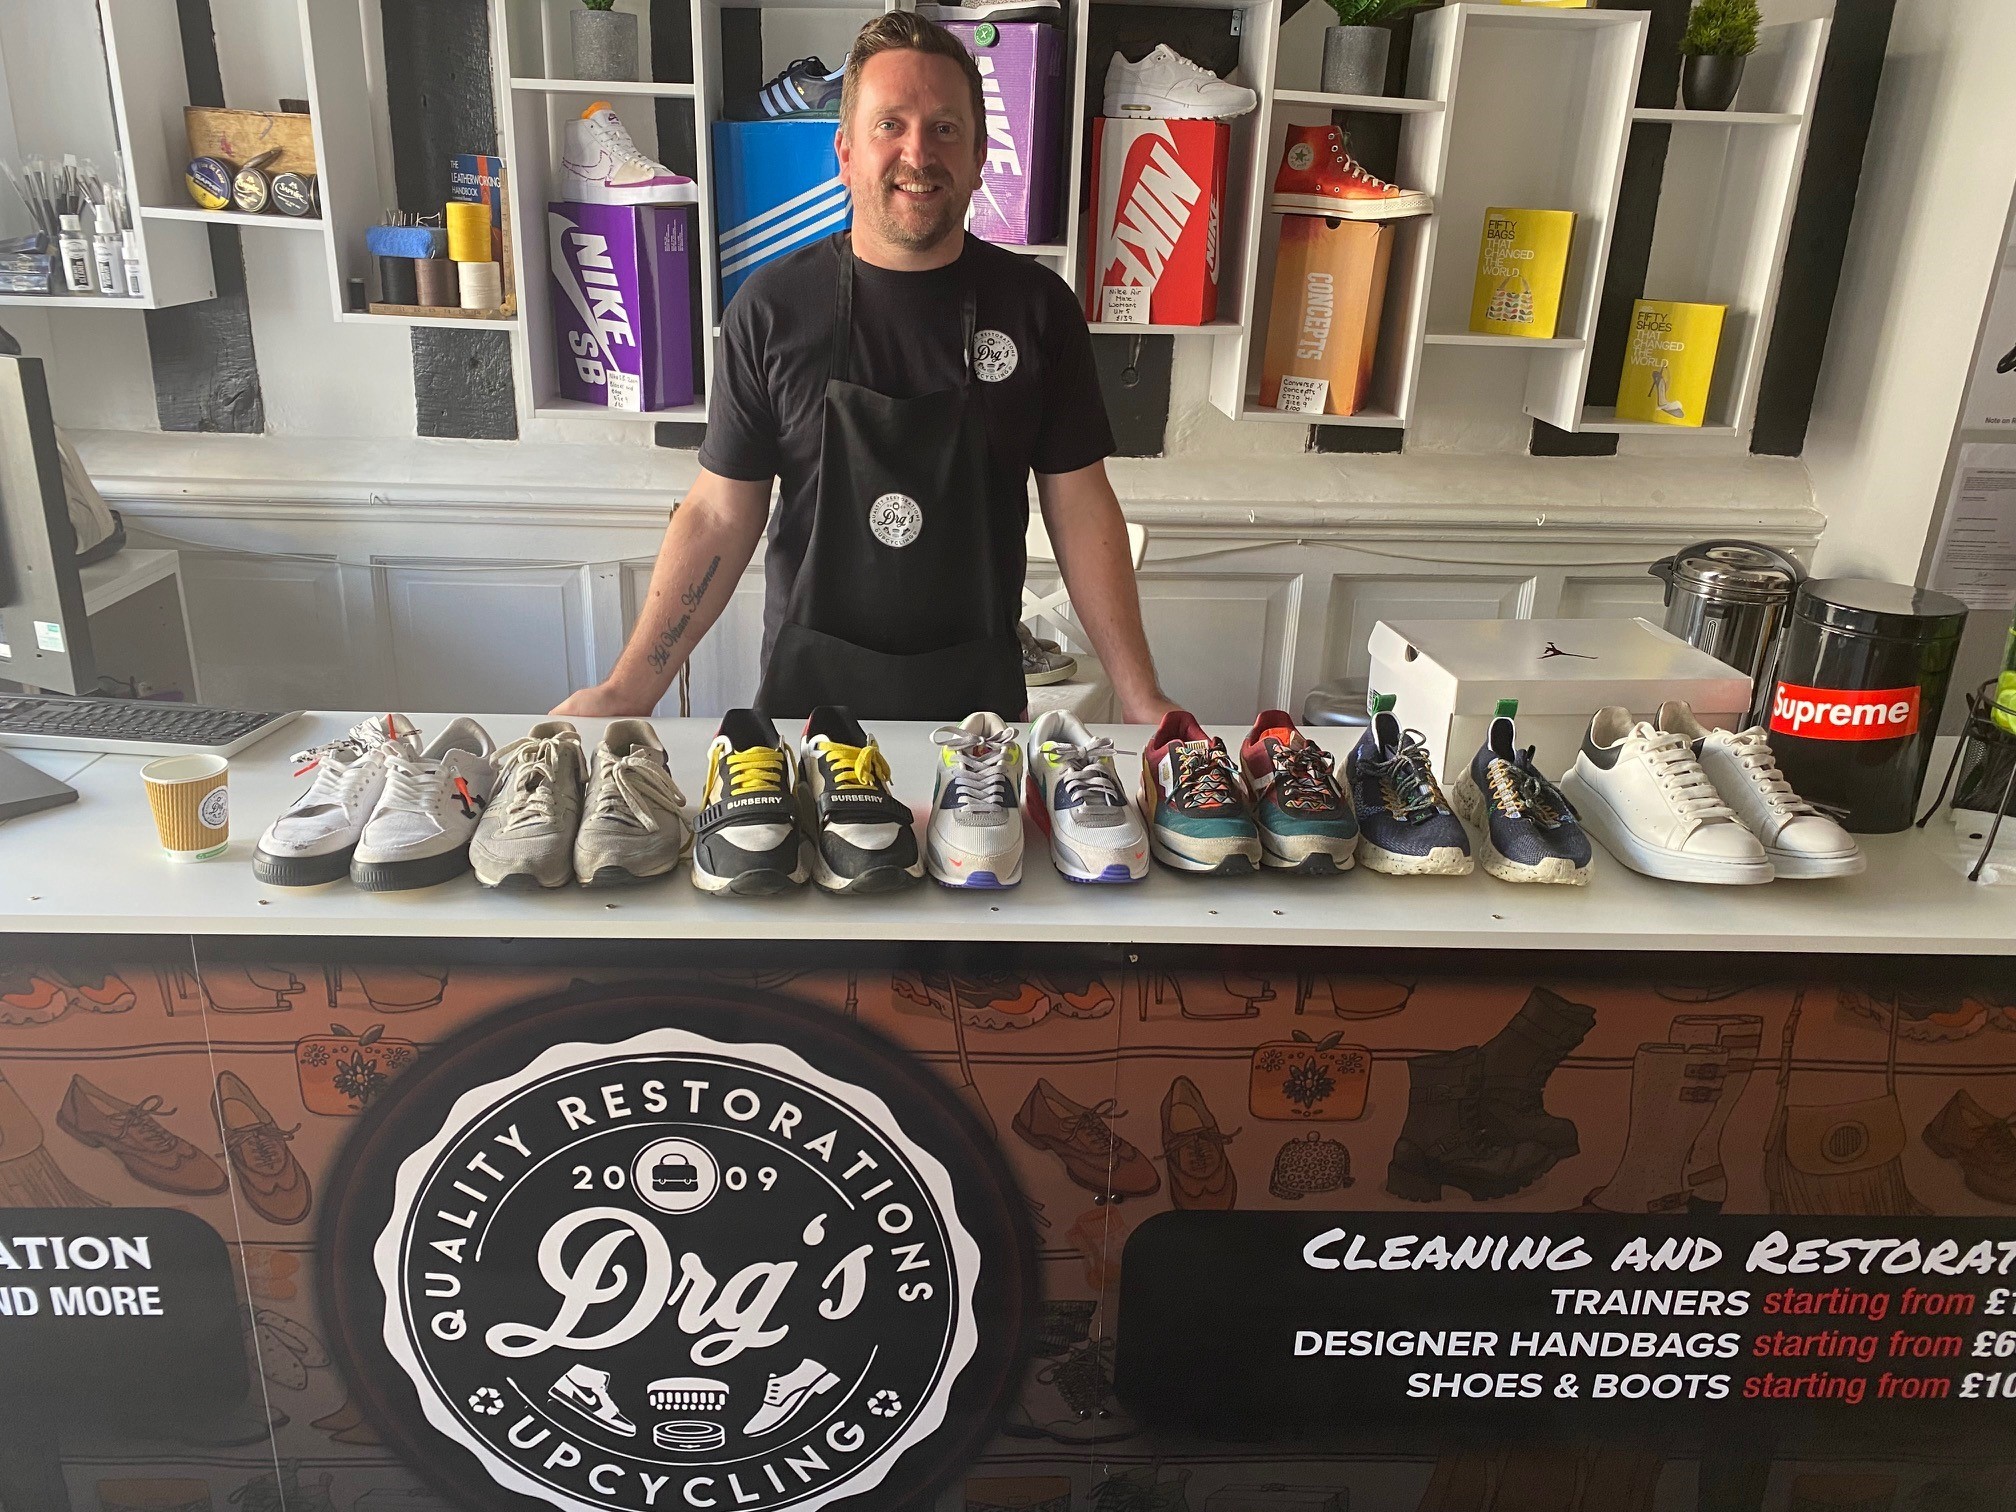 Shoe repair company Dr G's opens shop in Colchester town centre